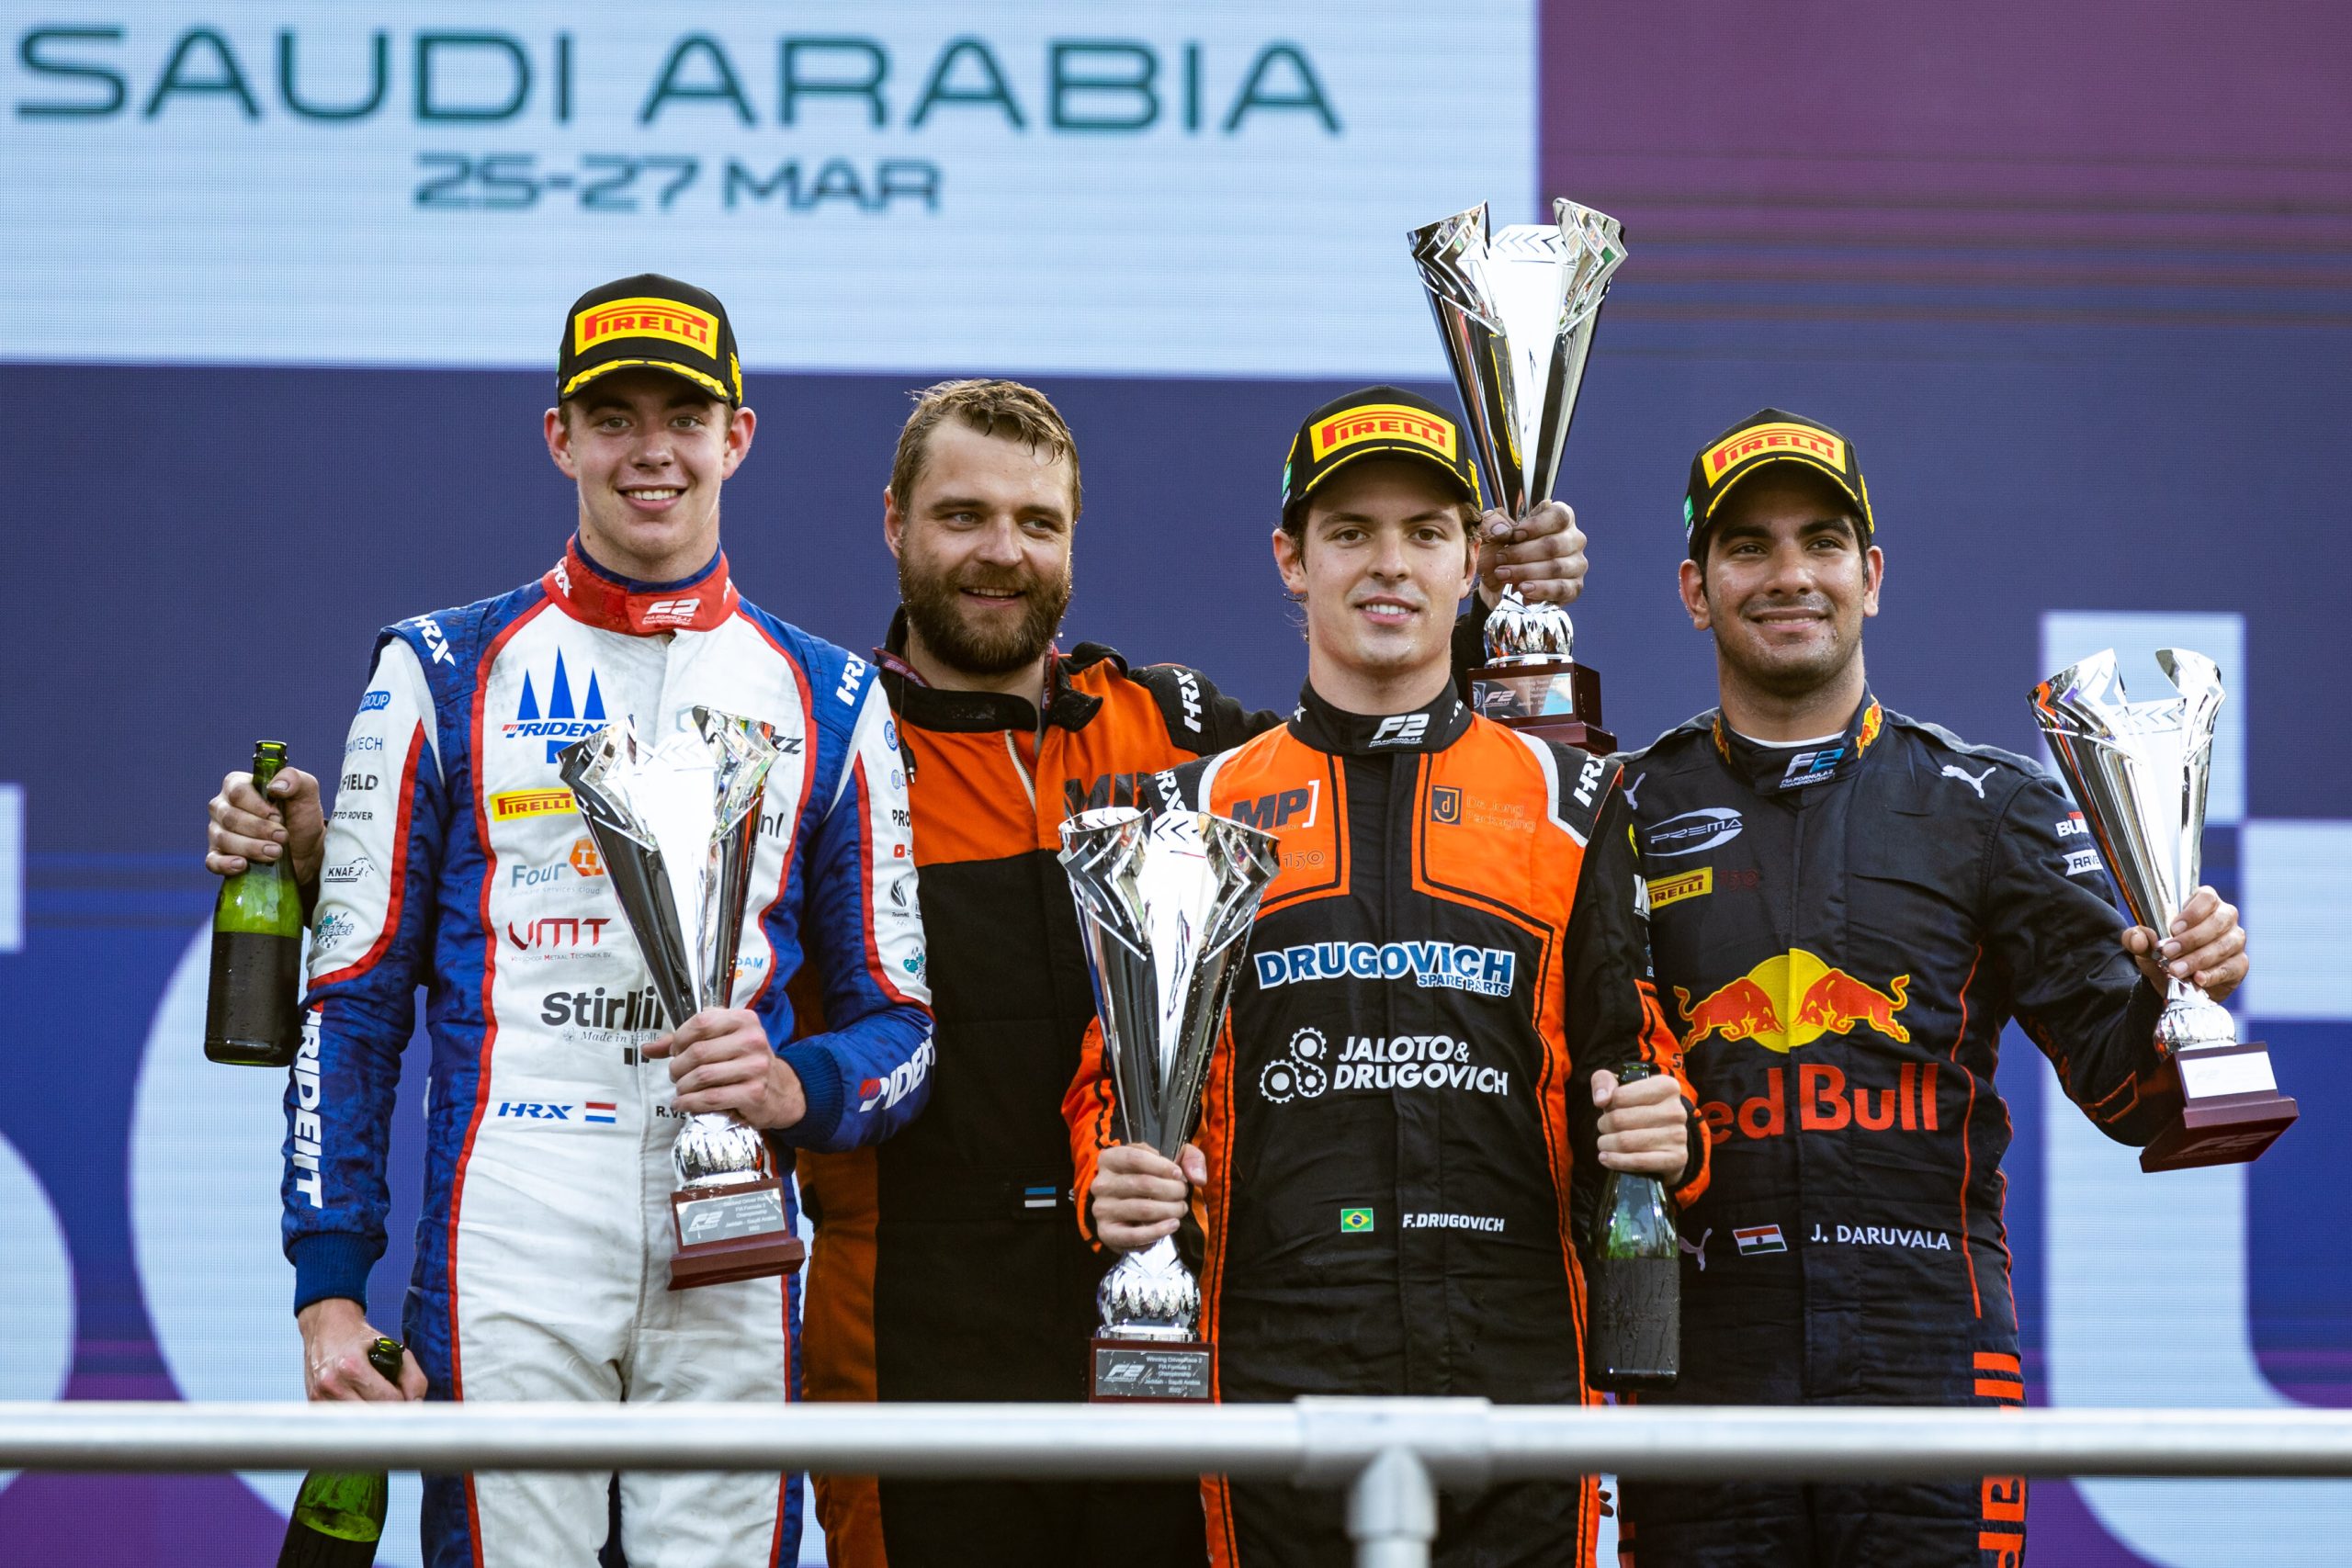 Felipe Drugovich on the top step of the podium in Jeddah.